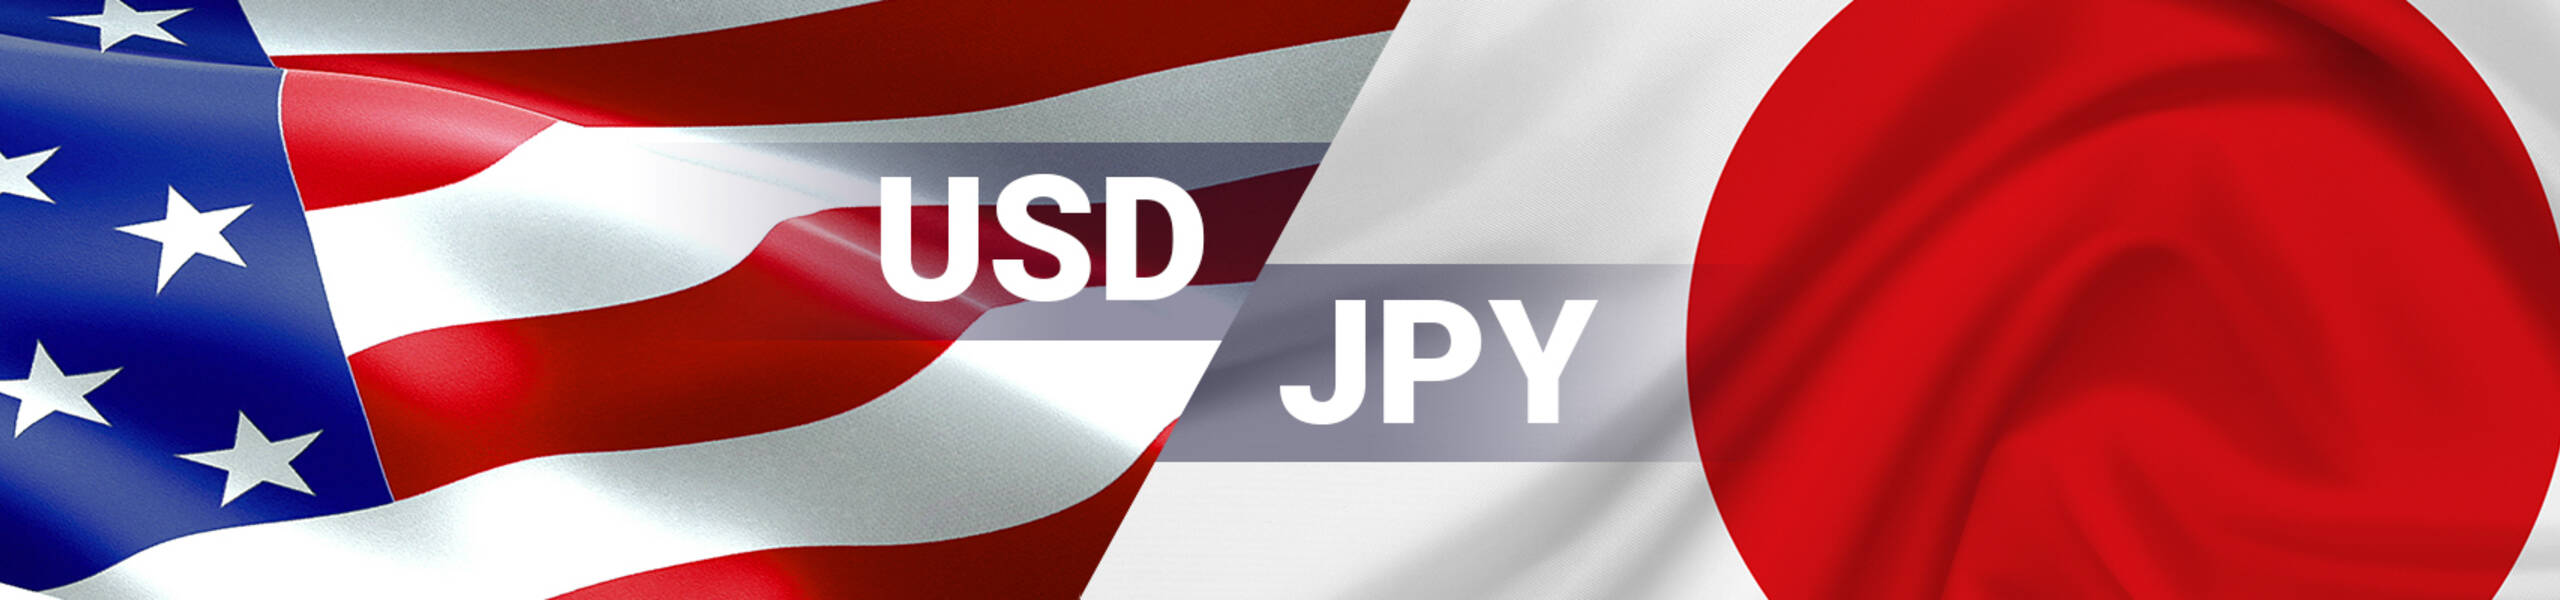 USD/JPY: trades continue in cloudy area